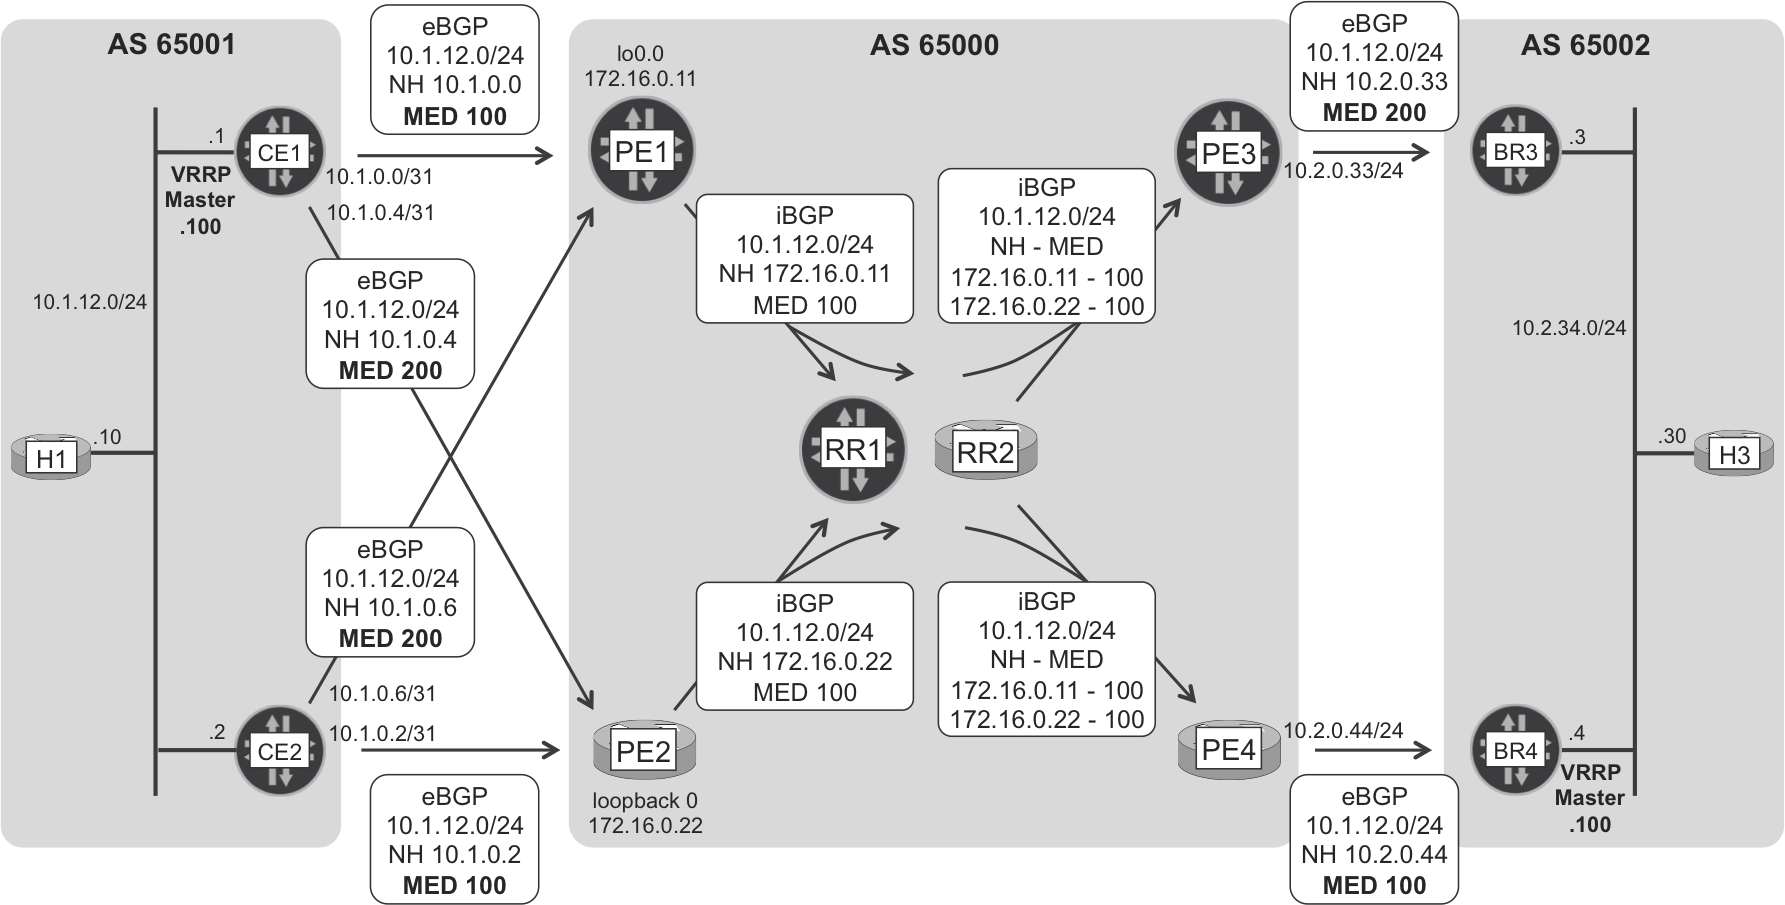 Internet eBGP and iBGP route signaling—H1’s subnet